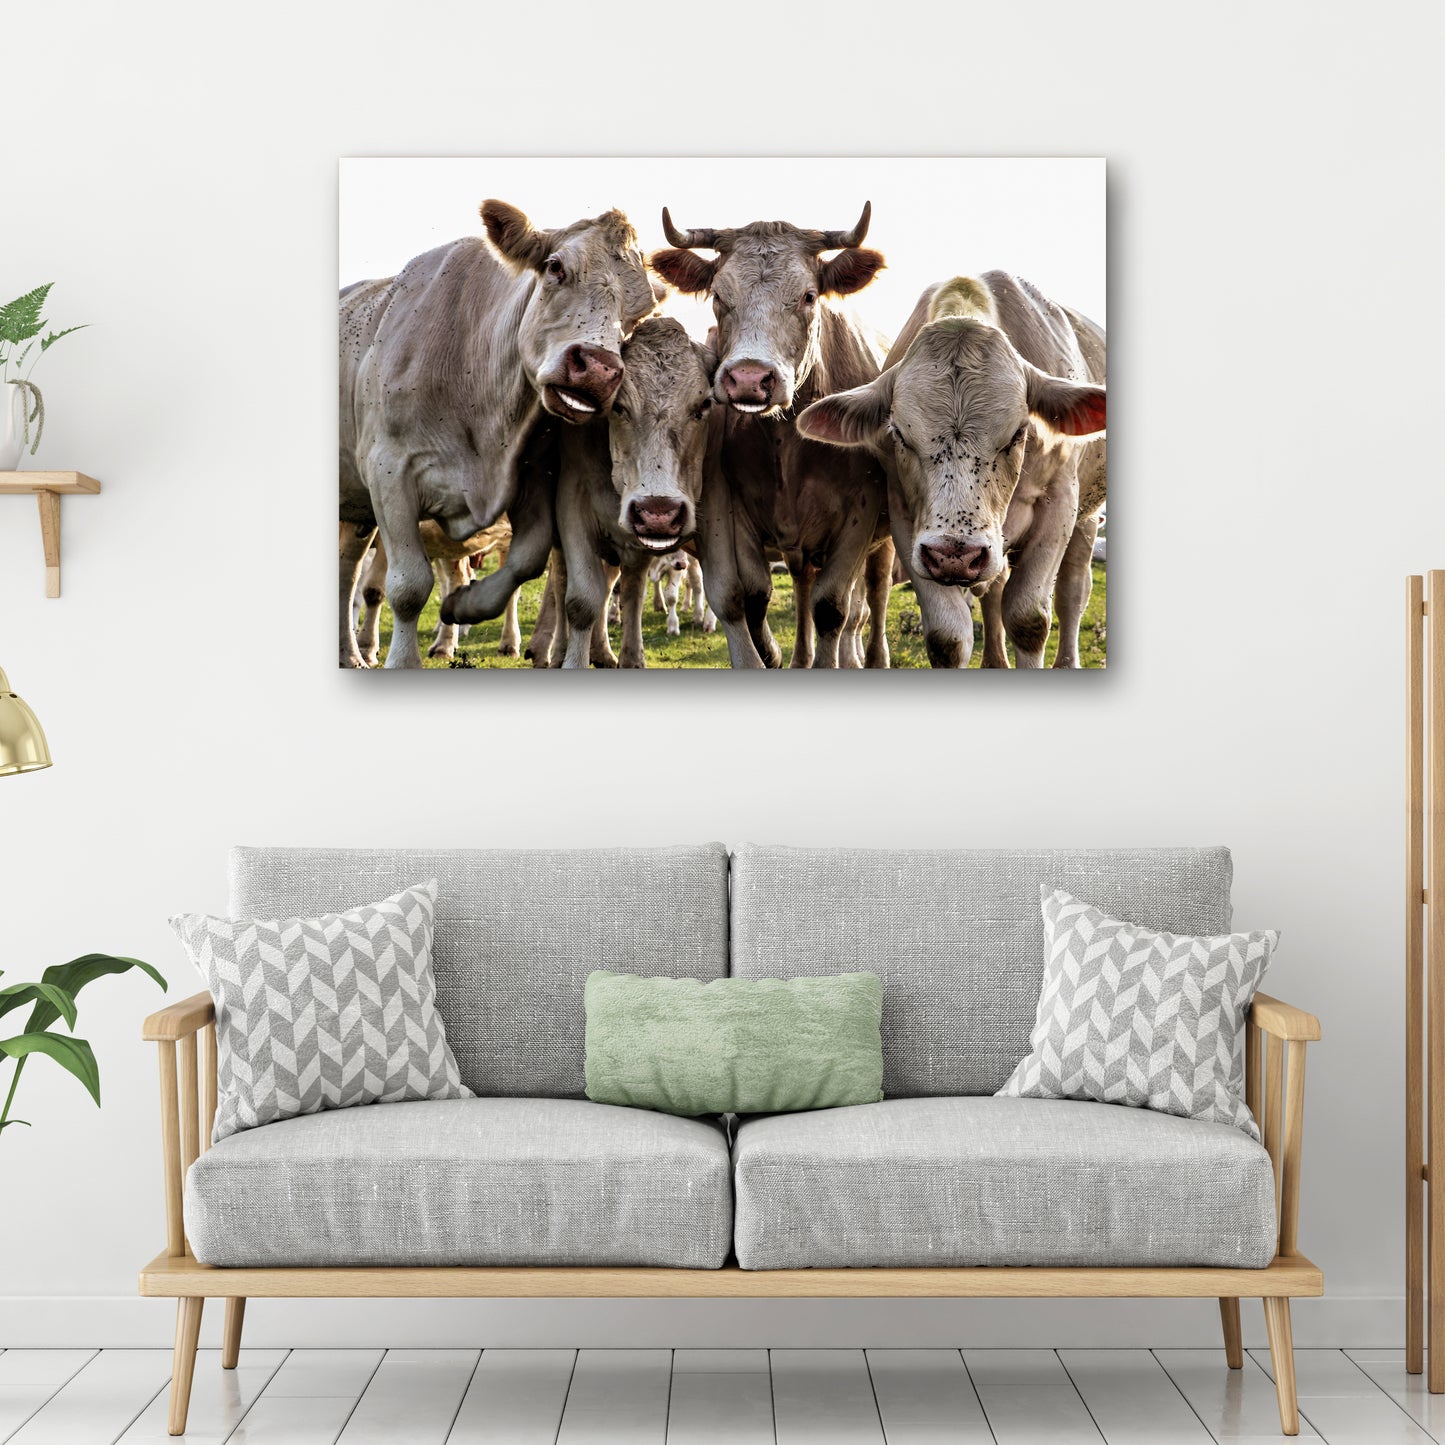 Happy Cows Canvas Wall Art Style 2 - Image by Tailored Canvases